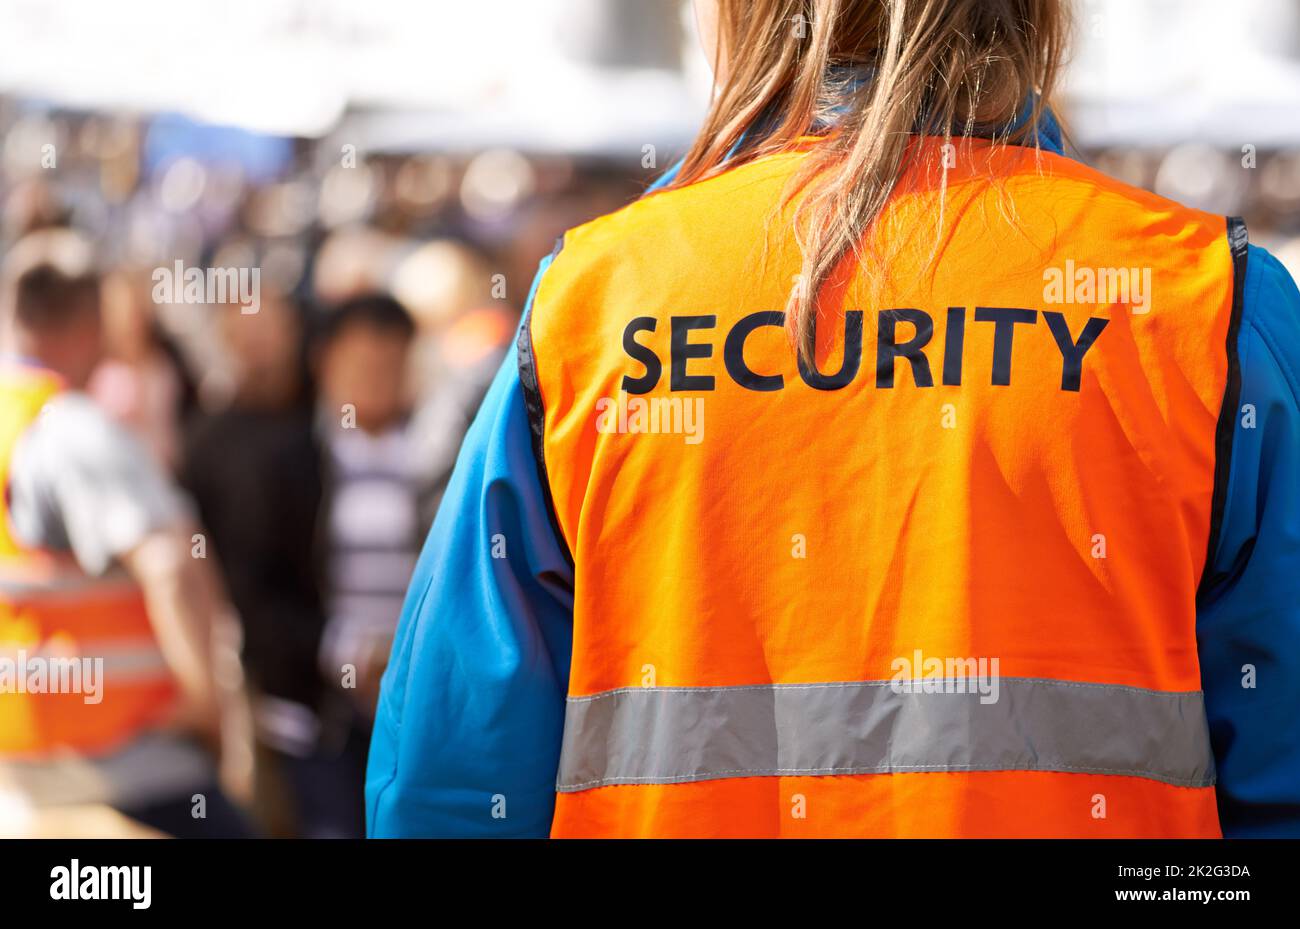 Safety is the main aim. Rearview shot of a security officer standing outdoors with a crowd in the background. Stock Photo